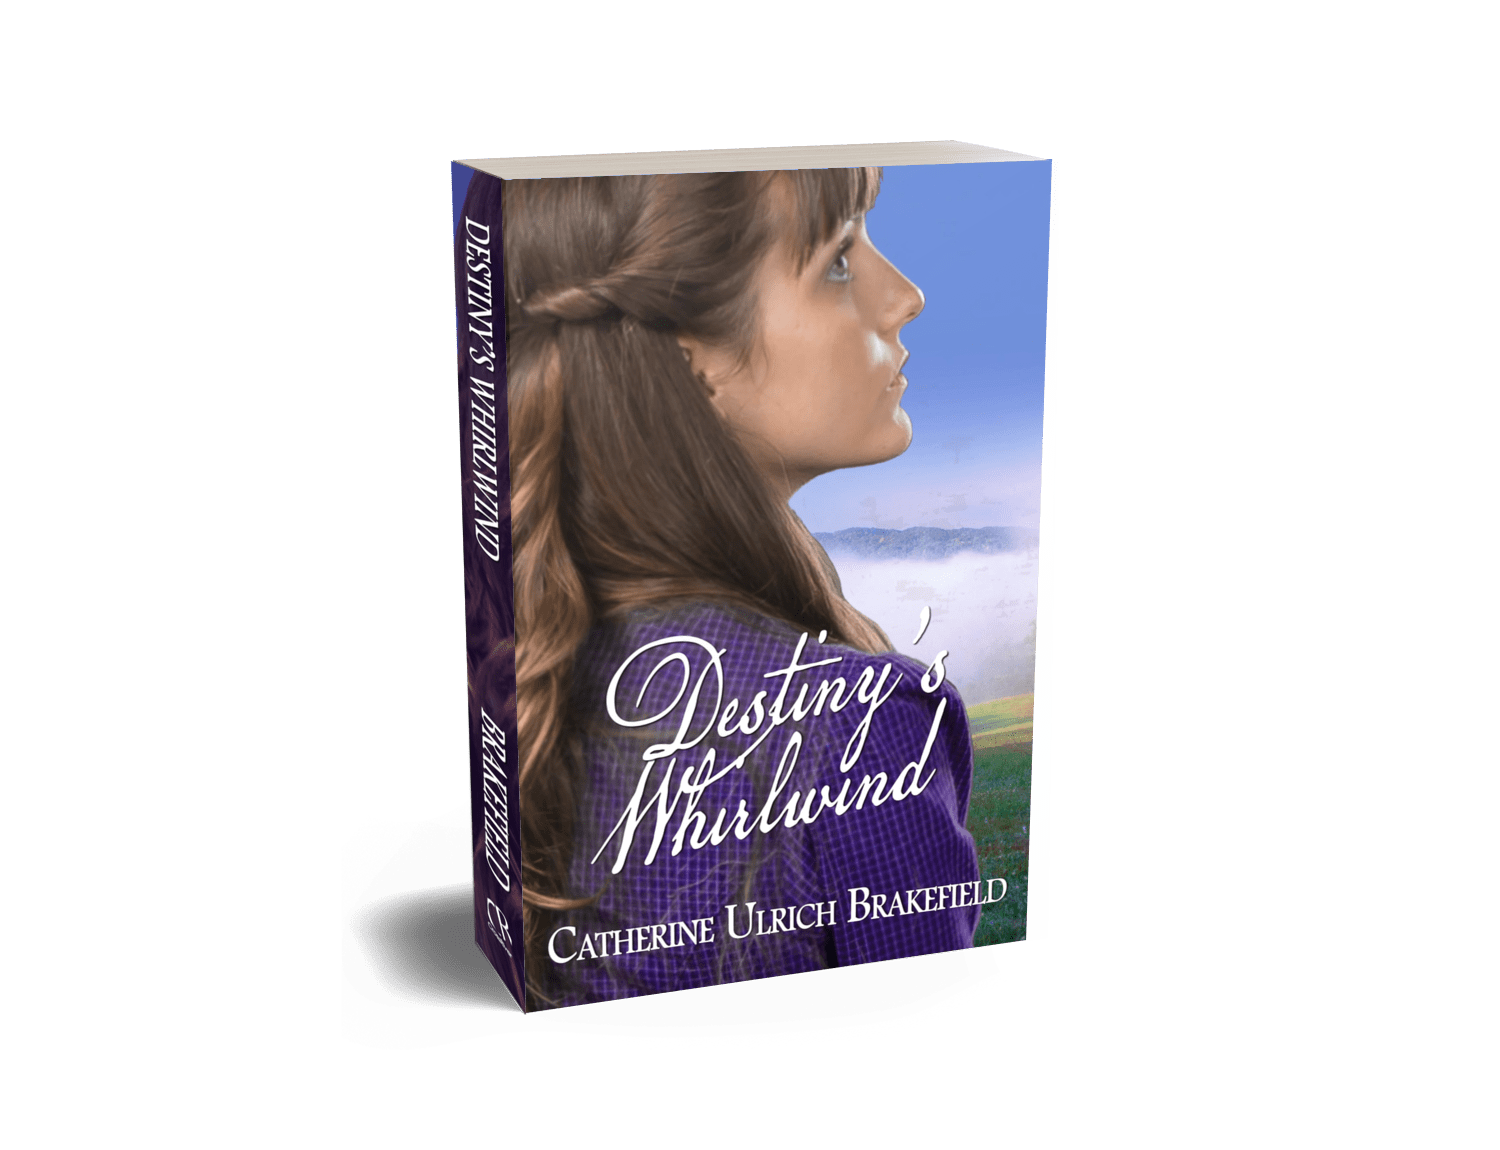 Destiny's Whirlwind by Catherine Ulrich Brakefield from Christian publisher CrossRiver Media